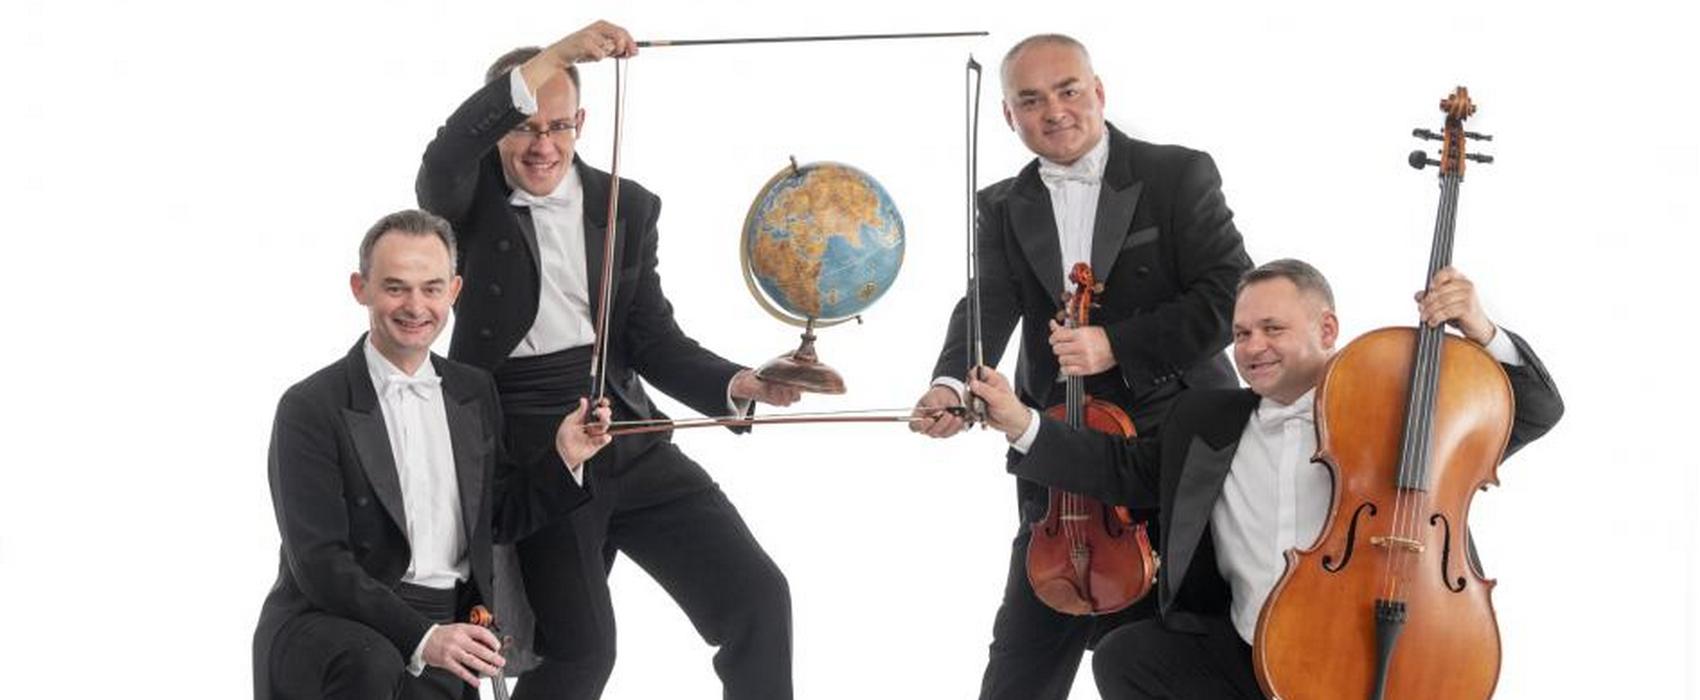 Humour - MozART Group - Globetrotters